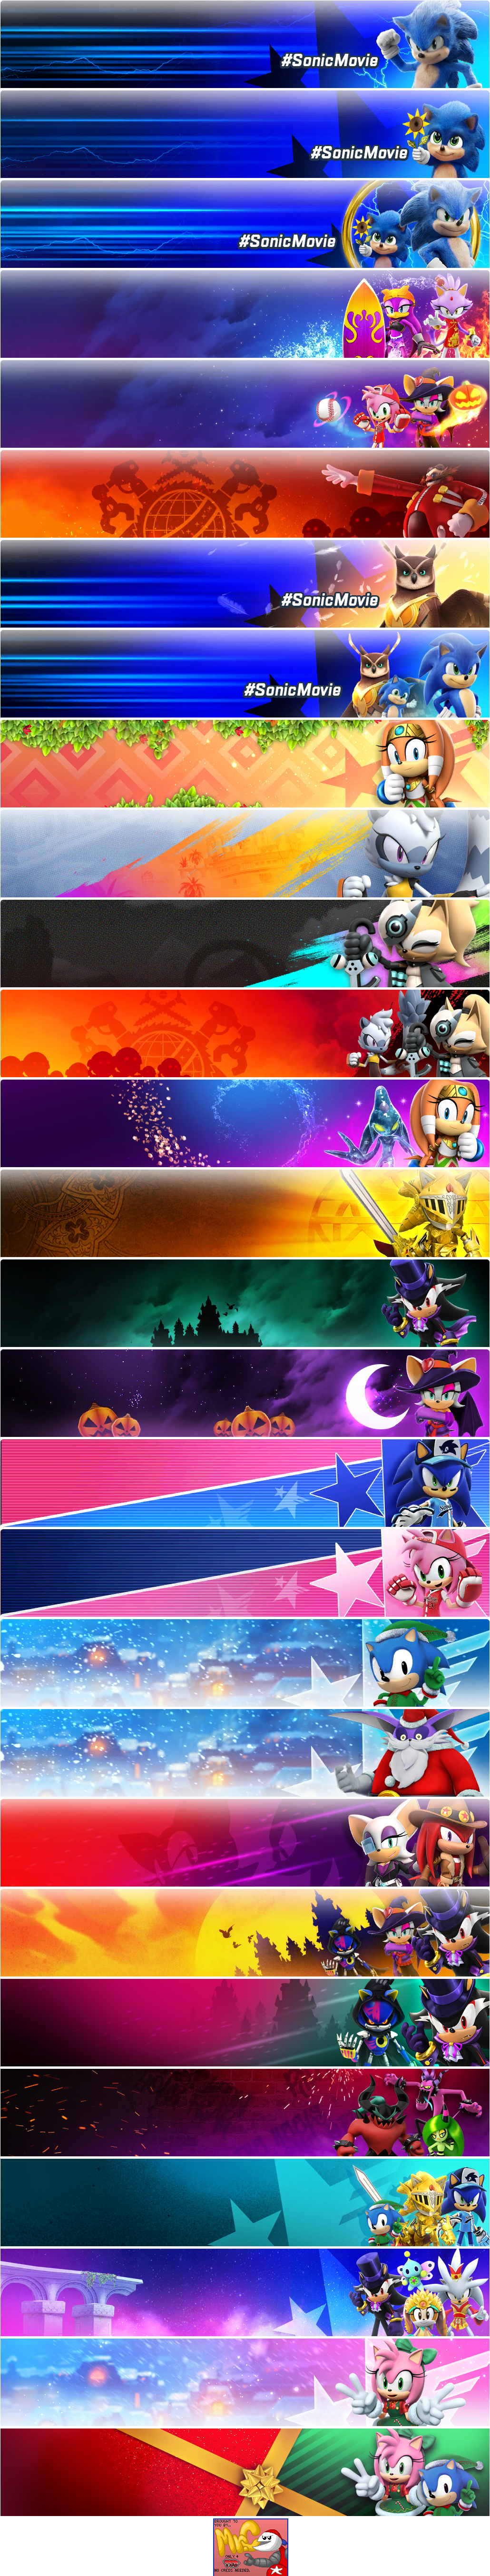 Sonic Forces: Speed Battle - Event Banners (2020)